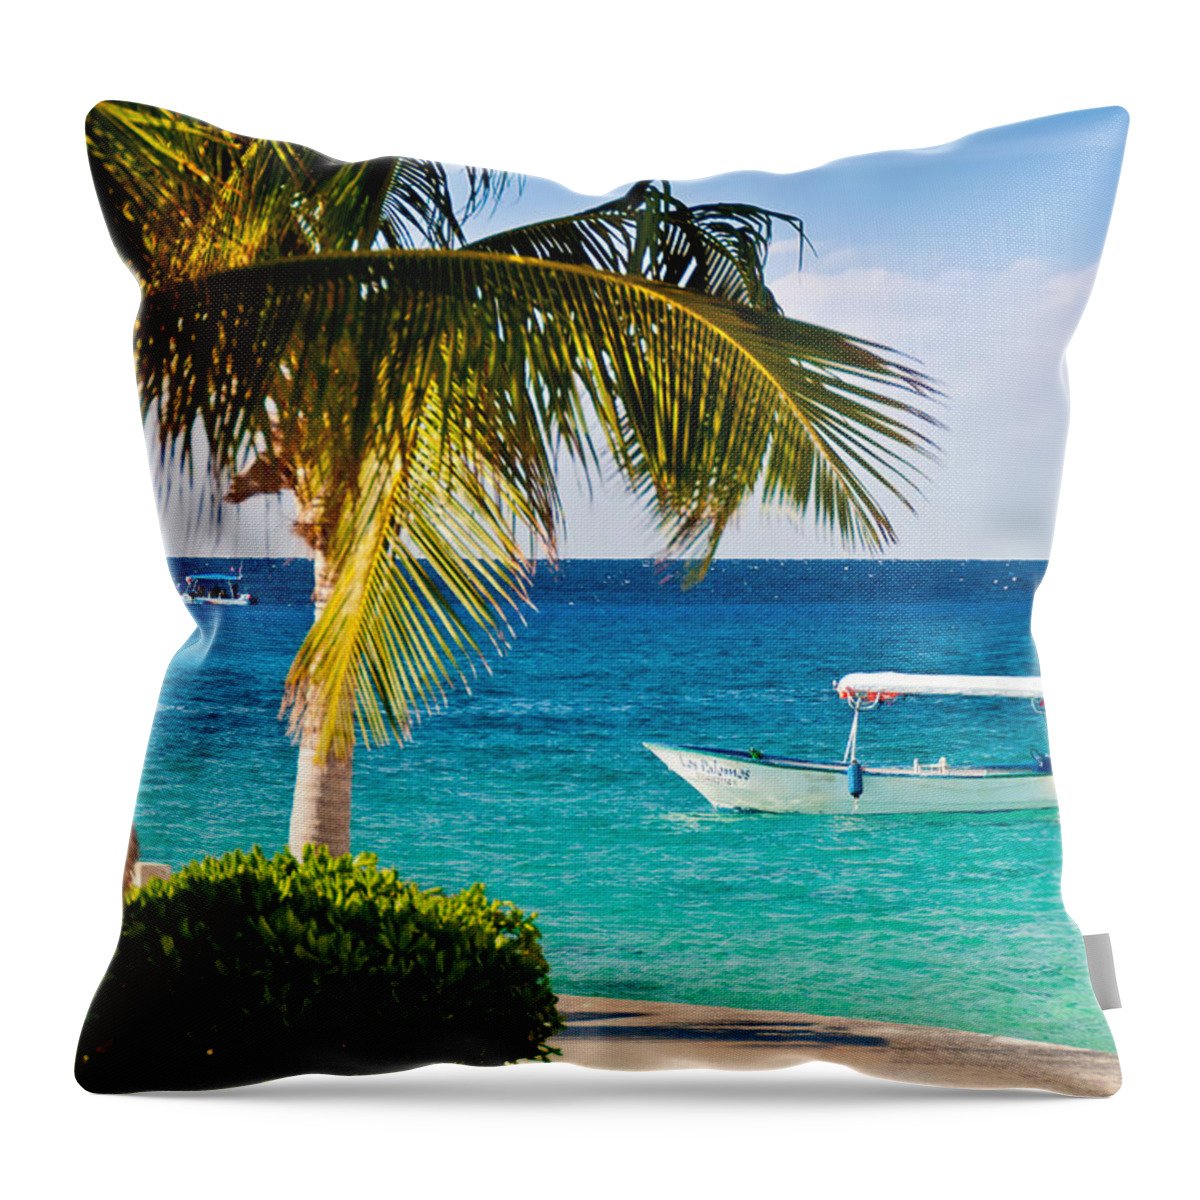 Cozumel Throw Pillow featuring the photograph Turquoise waters in Cozumel by Mitchell R Grosky